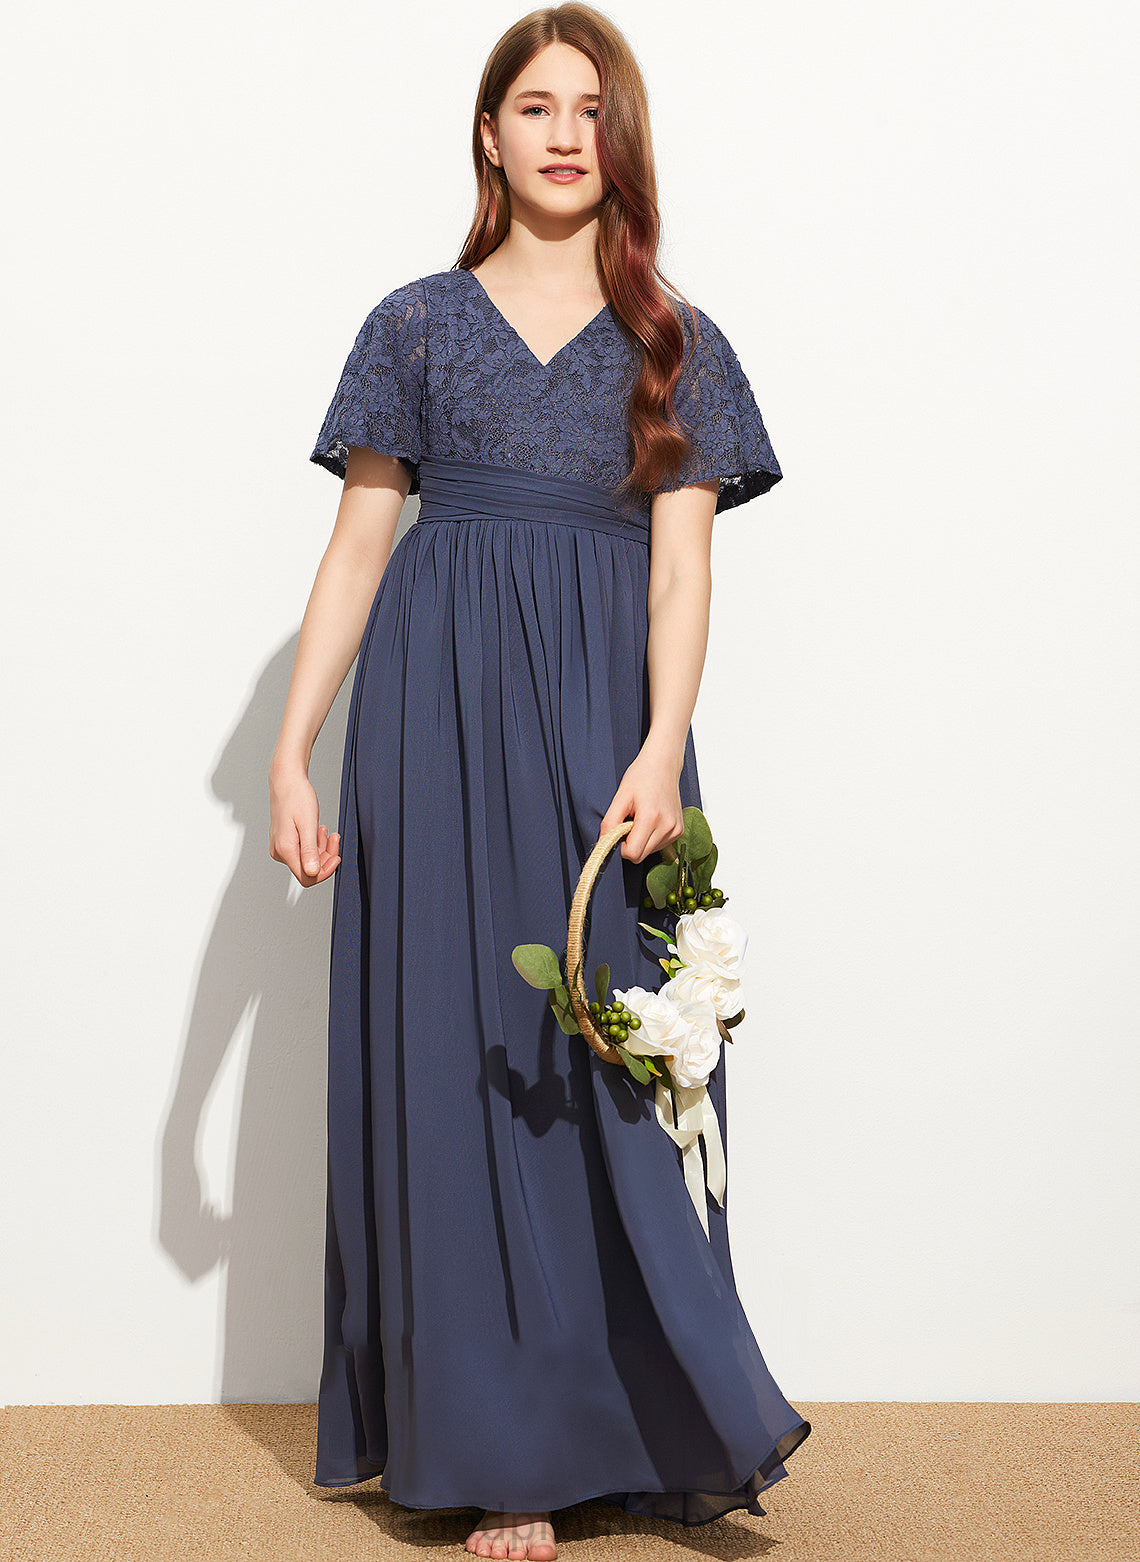 Bow(s) Asia Lace A-Line Chiffon Floor-Length Junior Bridesmaid Dresses V-neck With